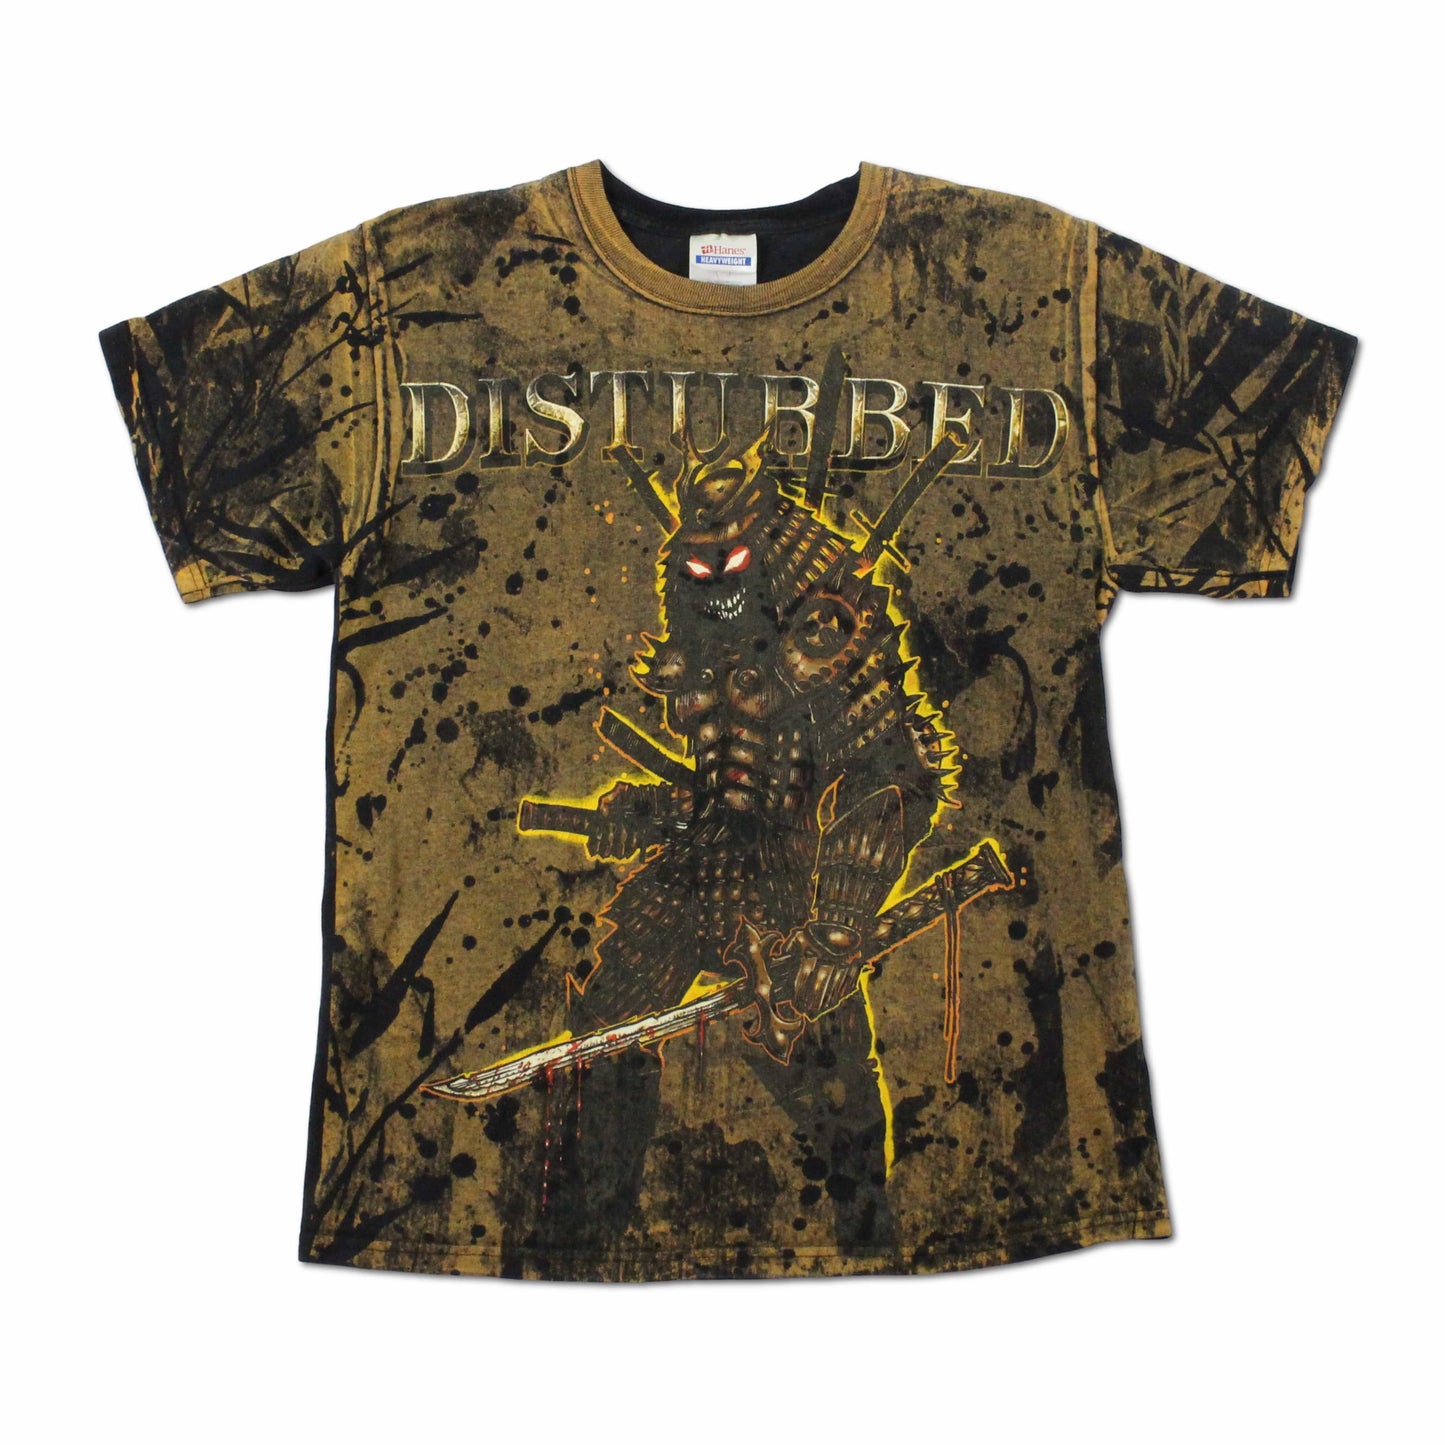 Other Disturbed All Over Print Band Tee Size Medium